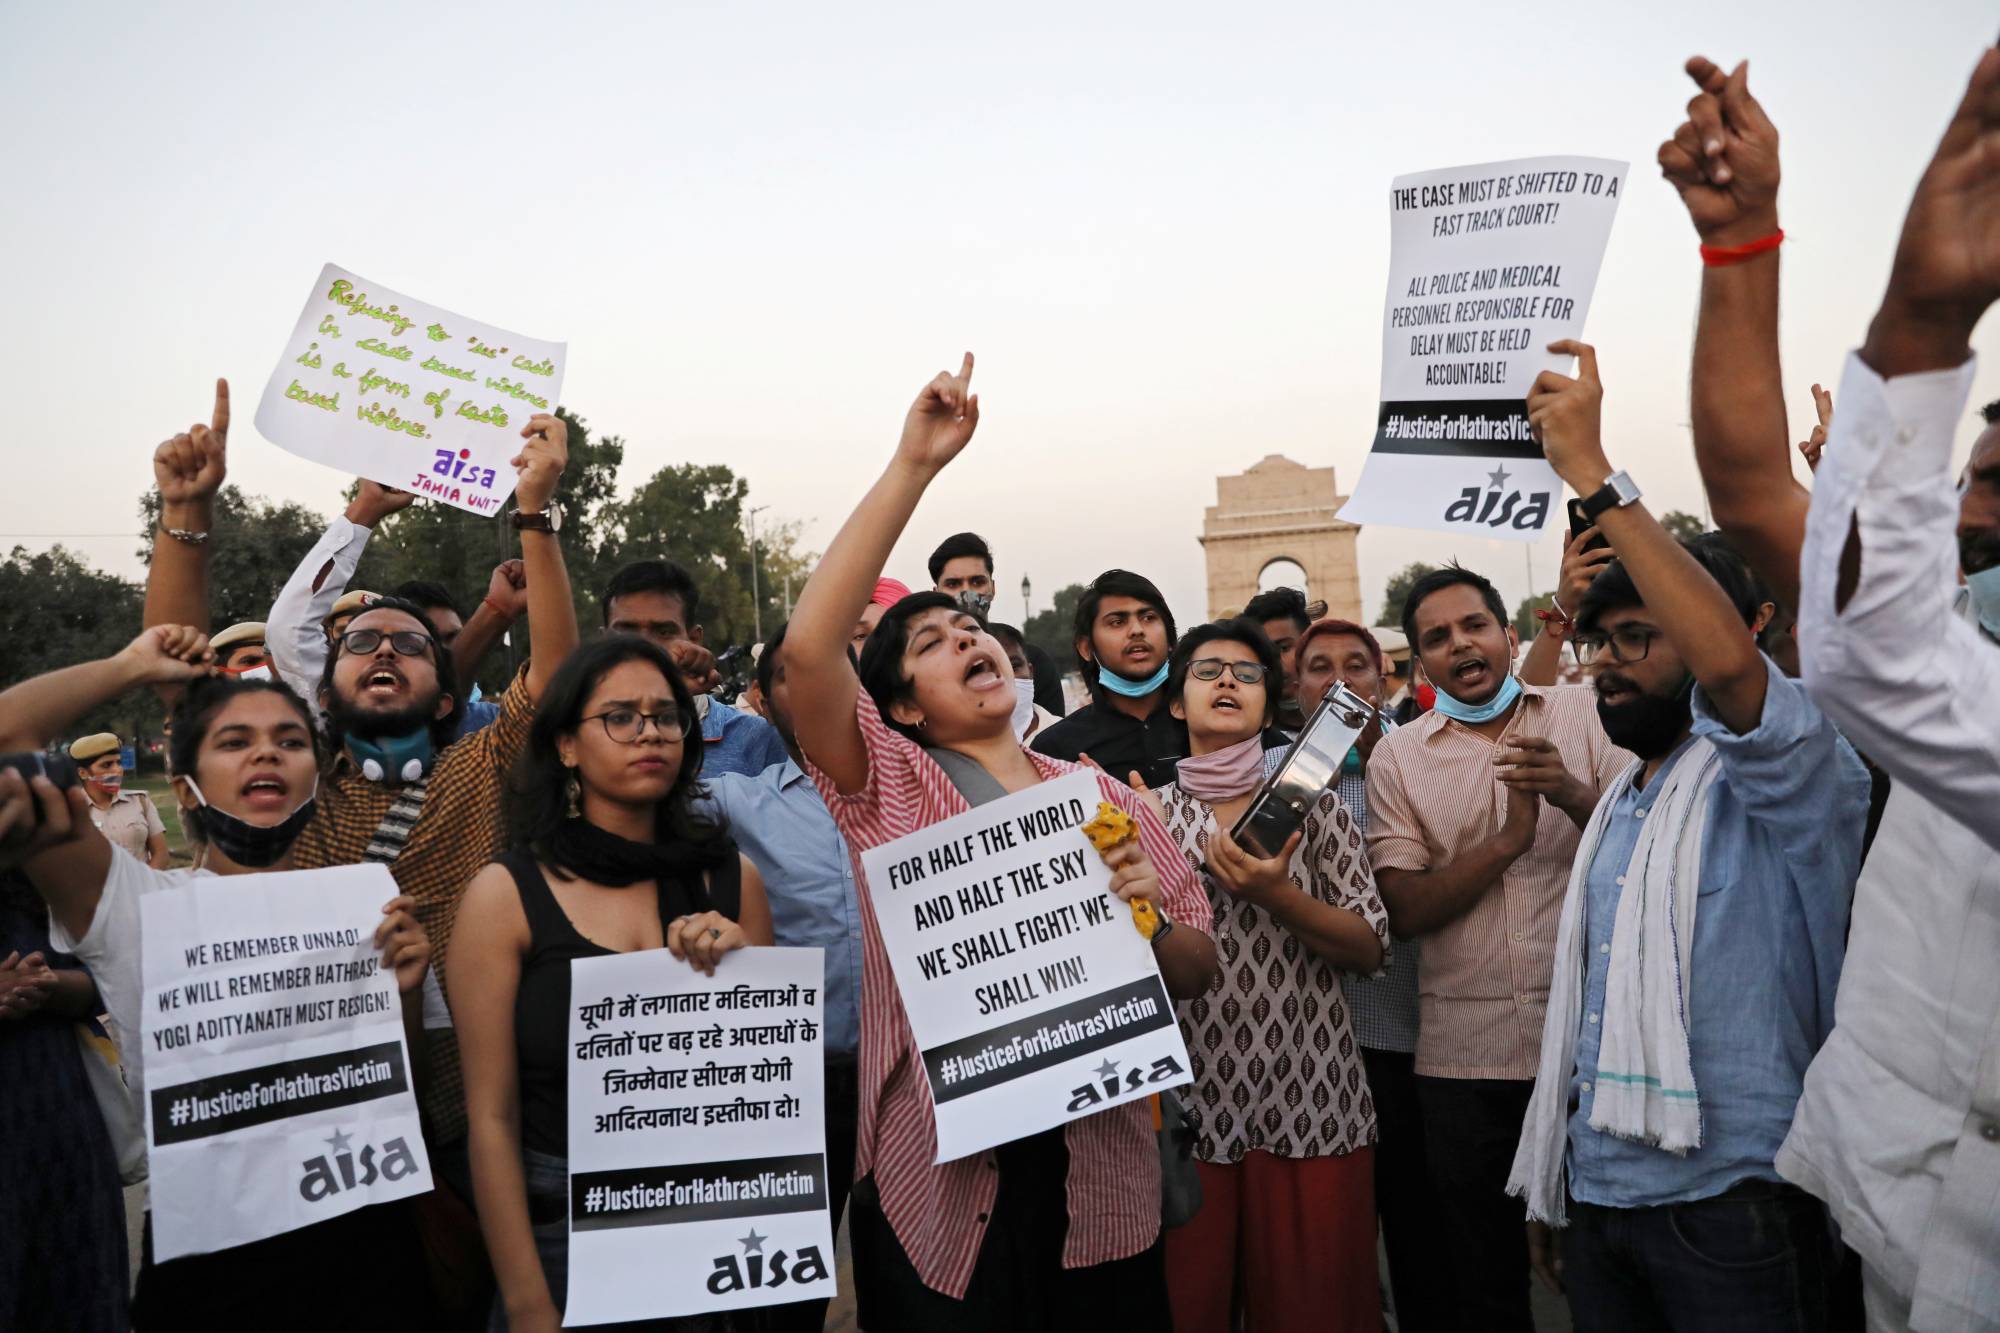 Woman dies in New Delhi after gang rape, fueling outrage again in India pic